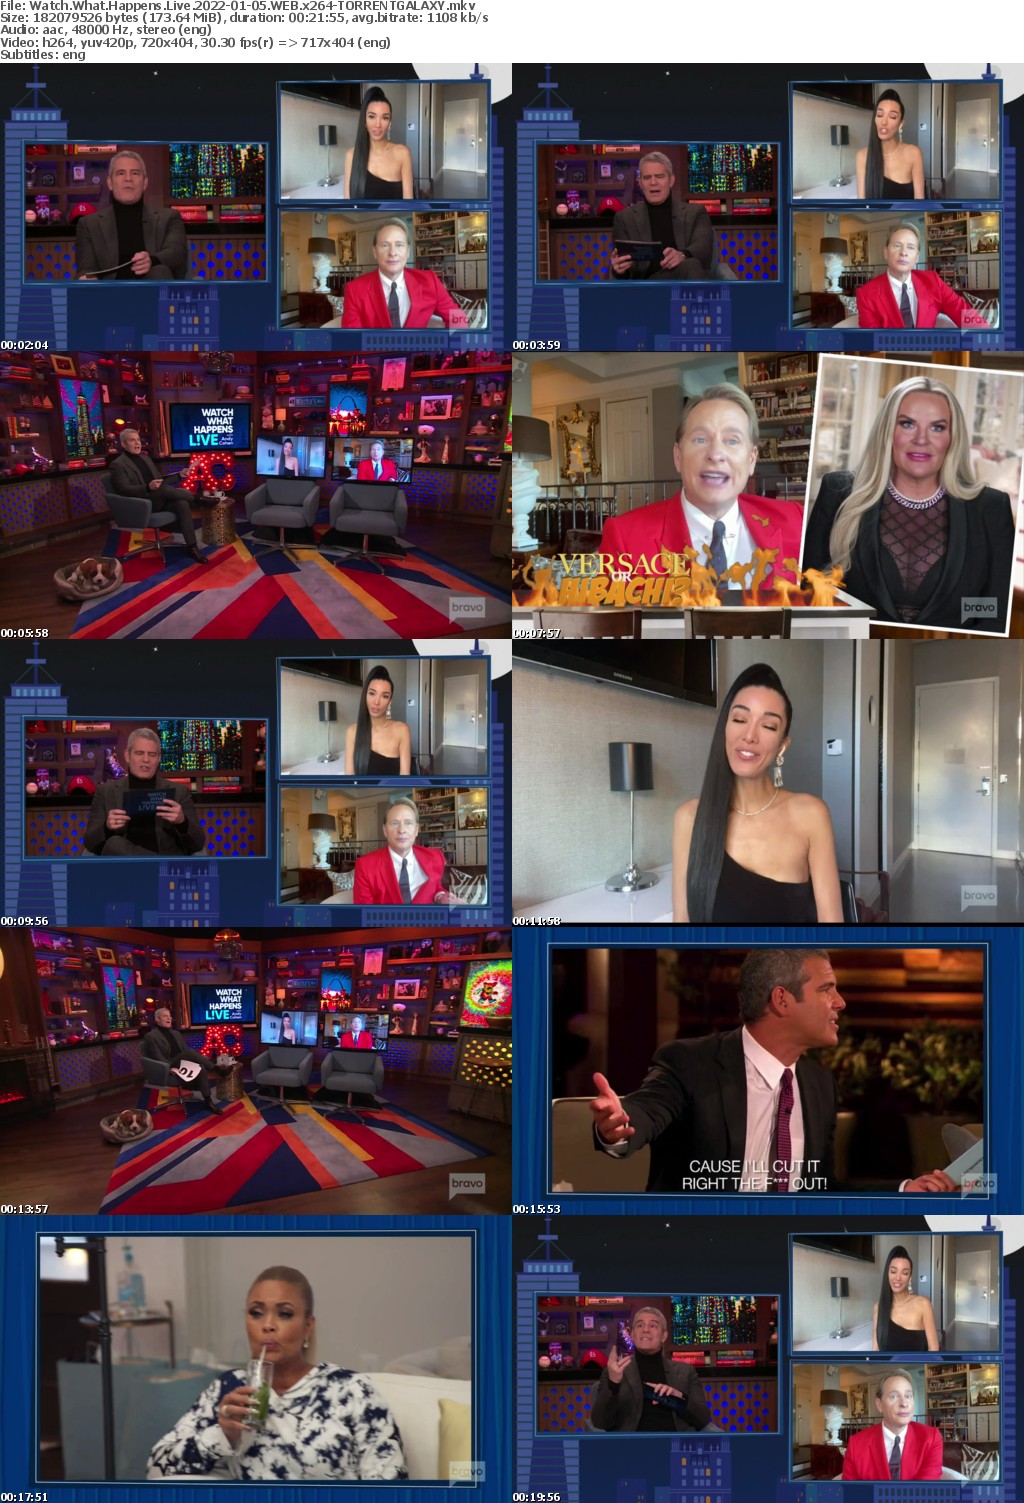 Watch What Happens Live 2022-01-05 WEB x264-GALAXY